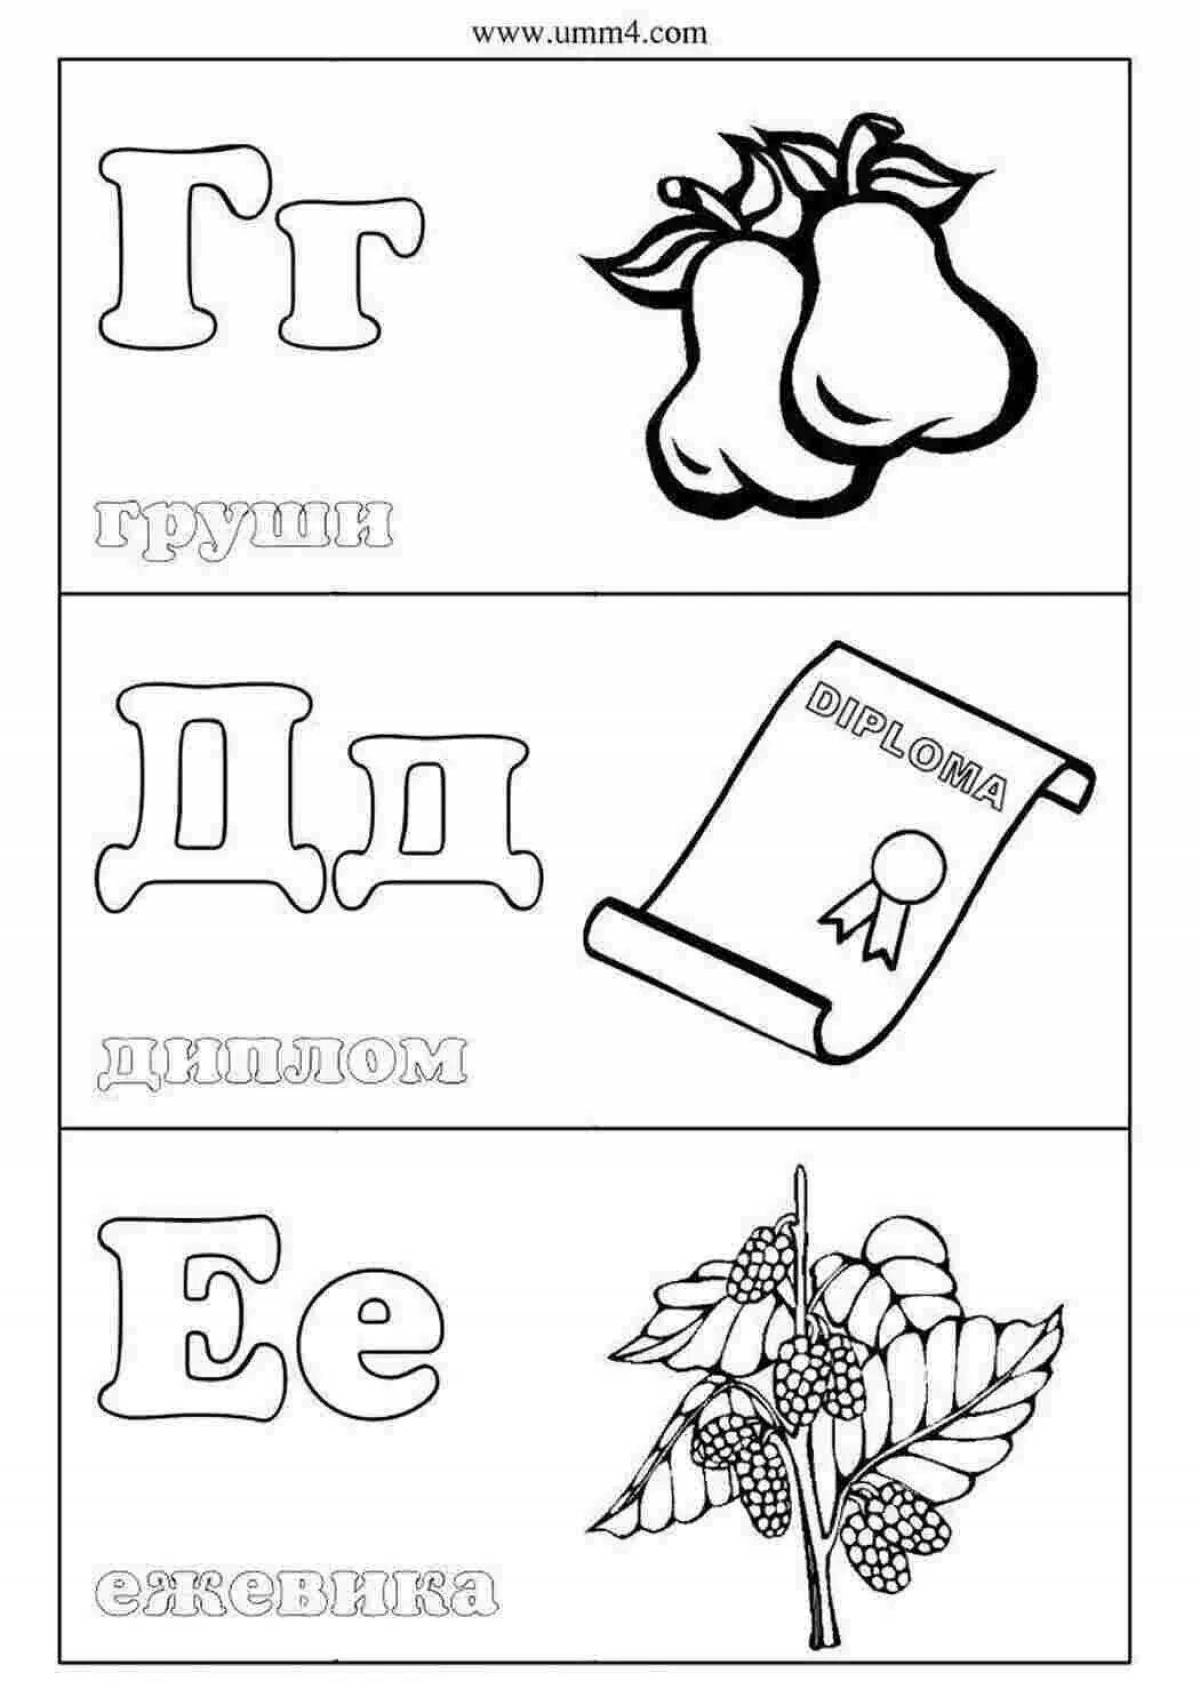 Fun coloring book with Russian alphabet